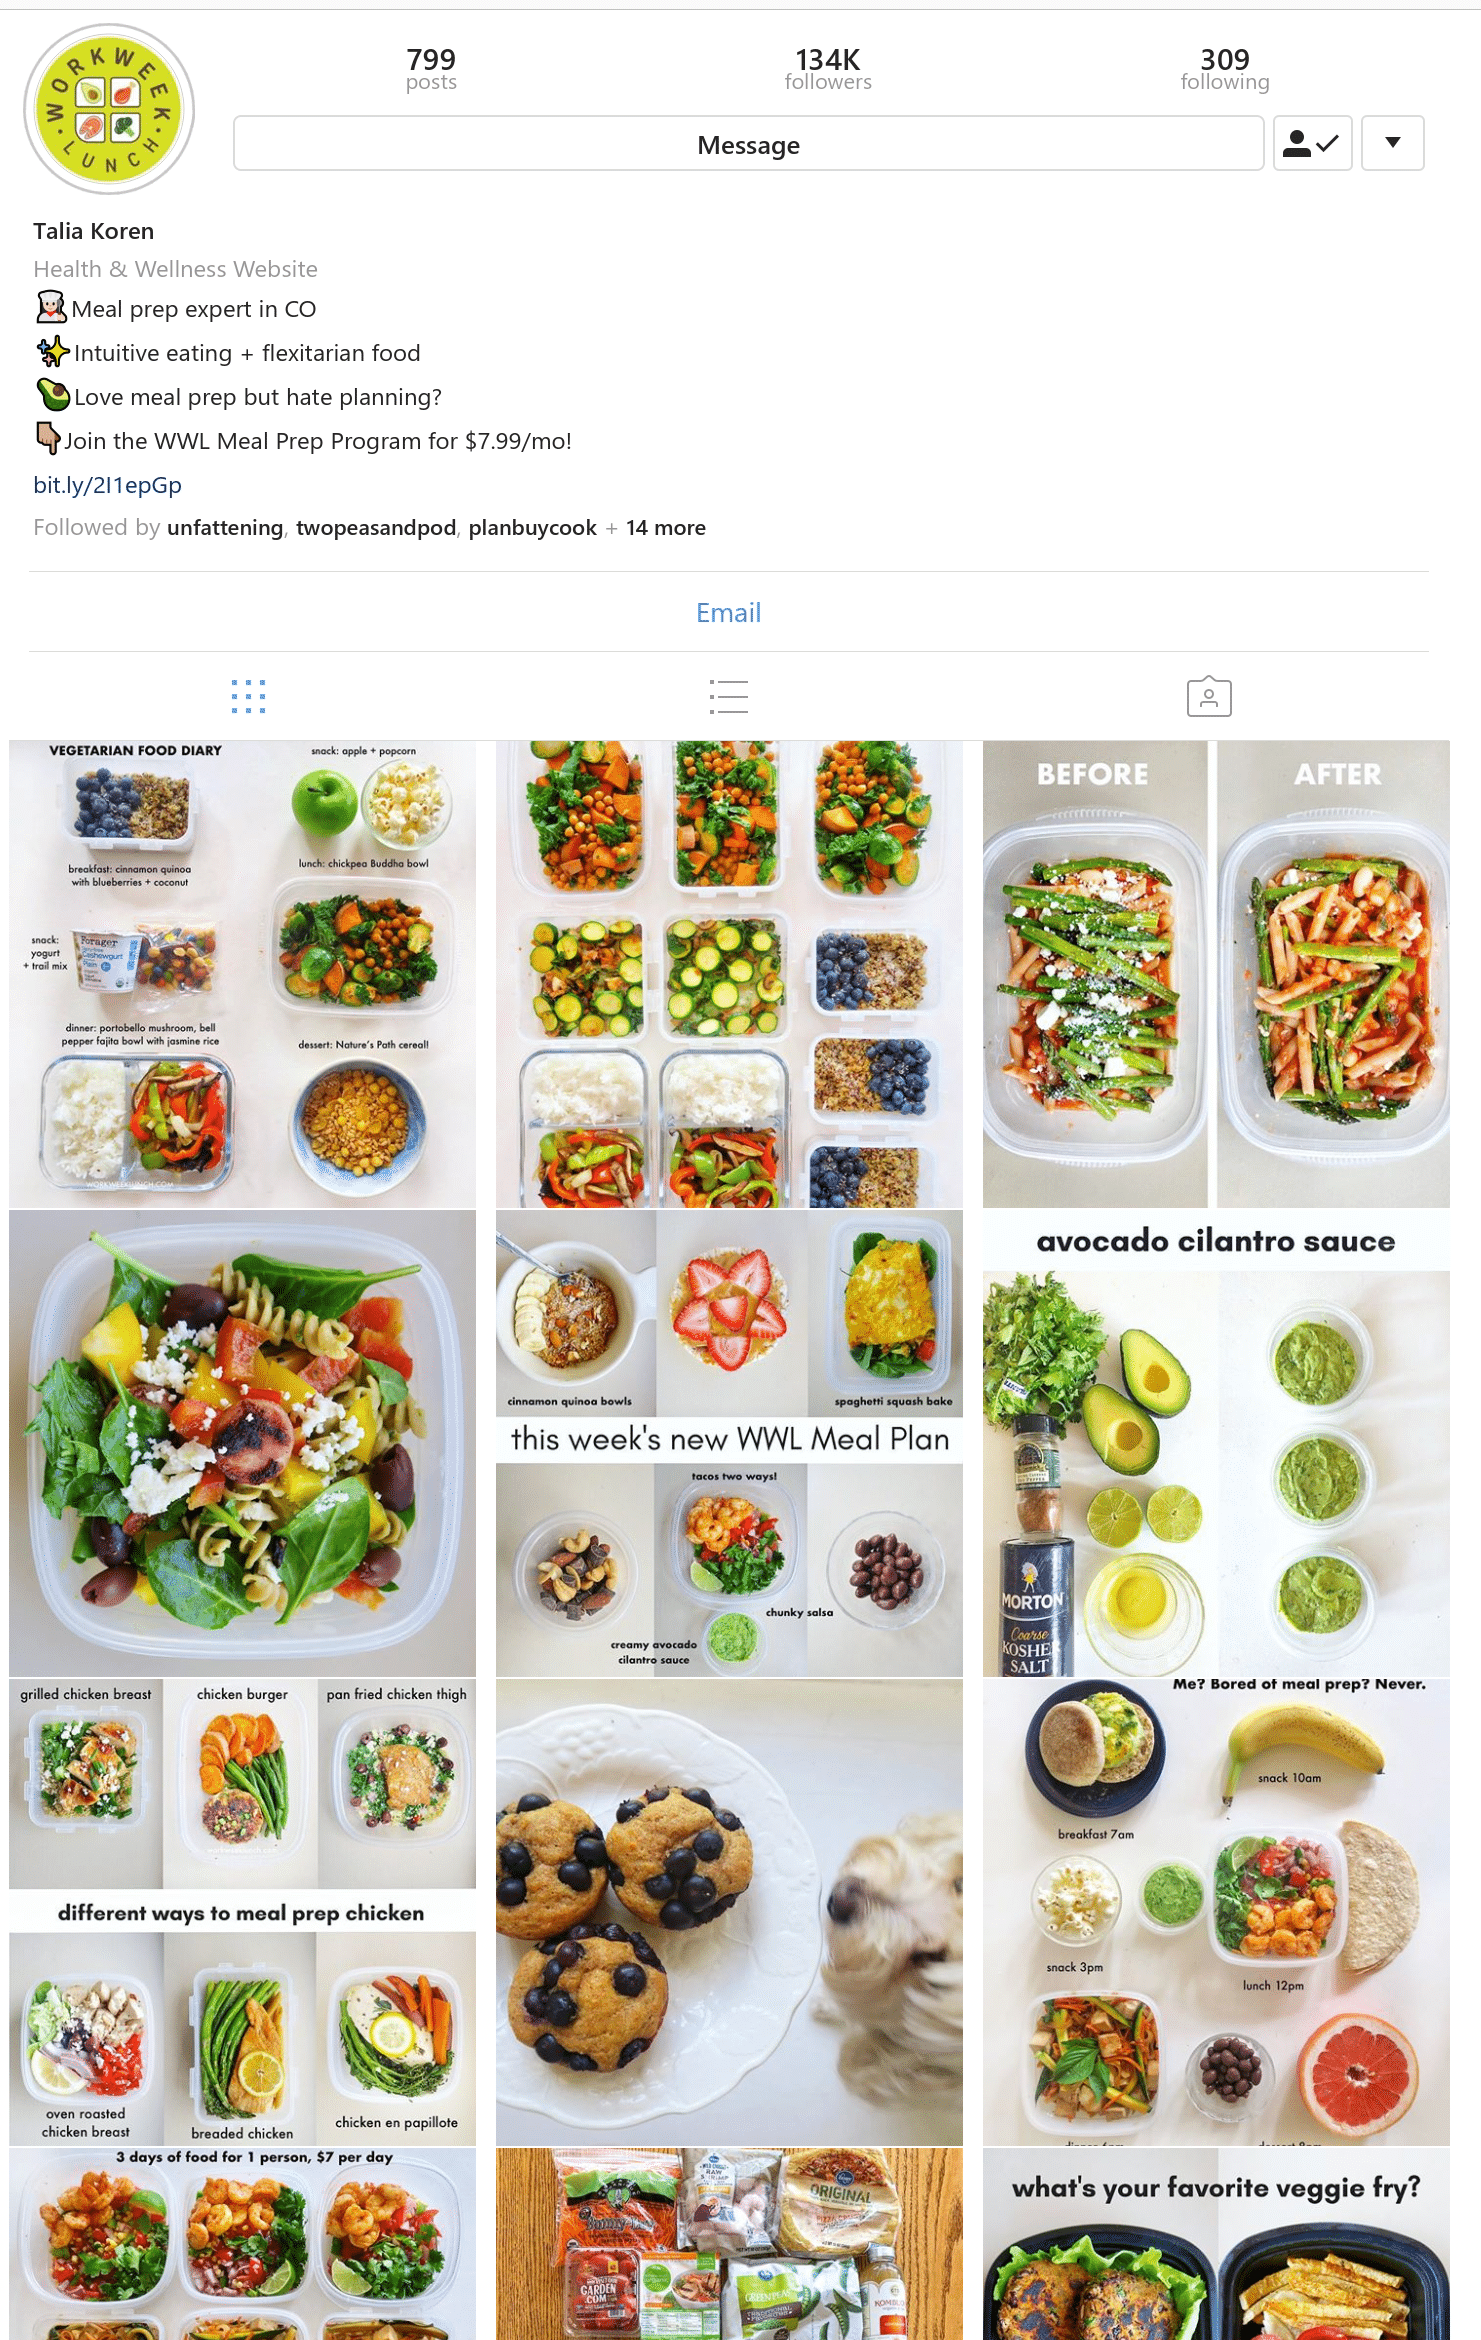 5 best Instagram accounts to inspire you to start meal prepping today!